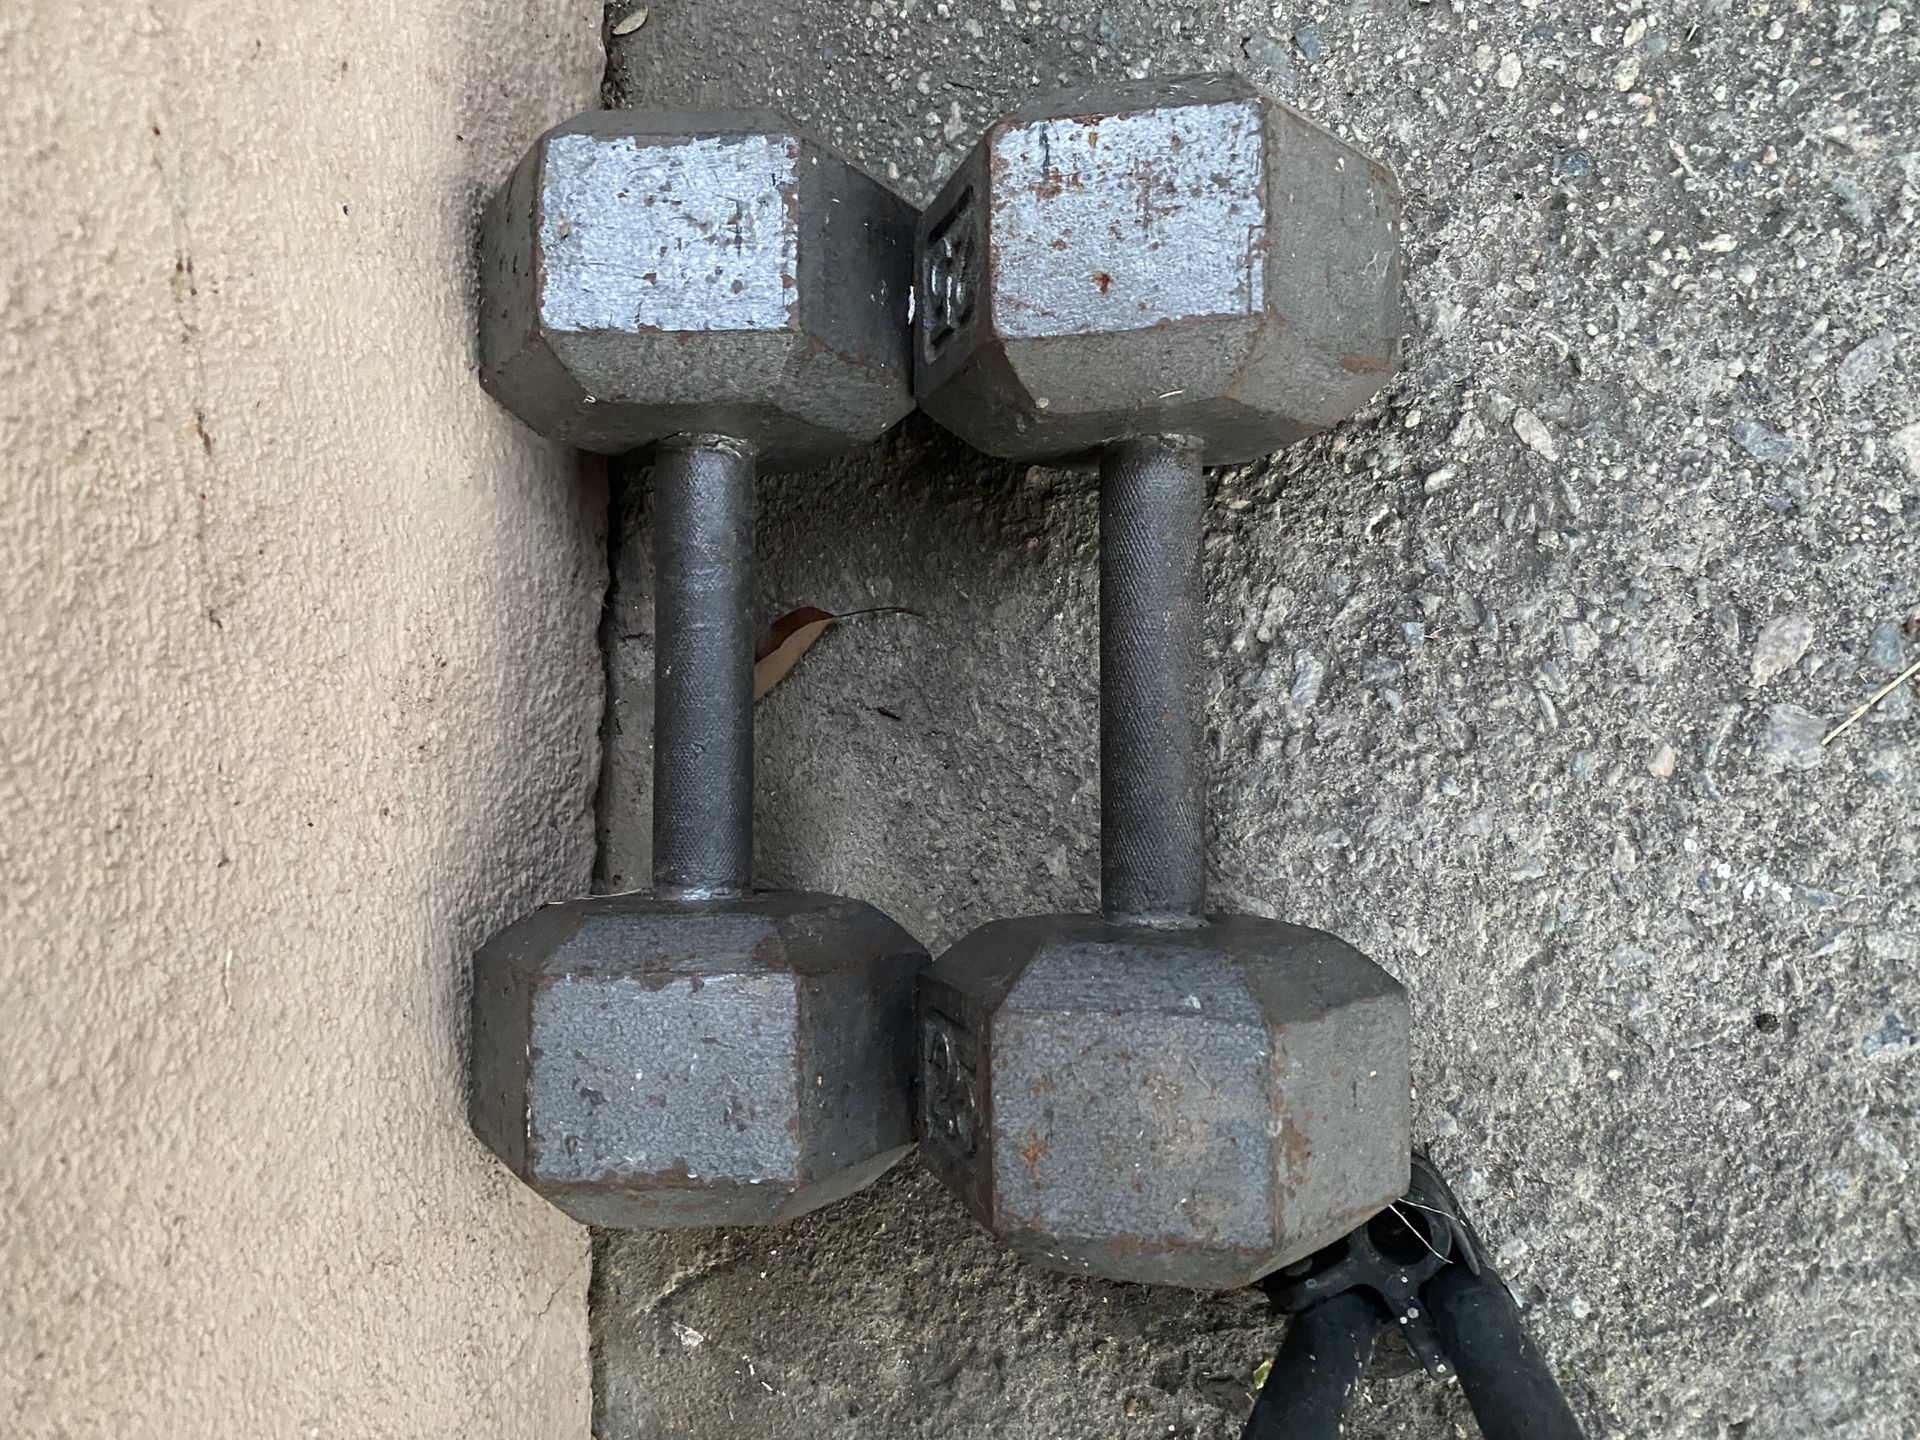 25lb weights